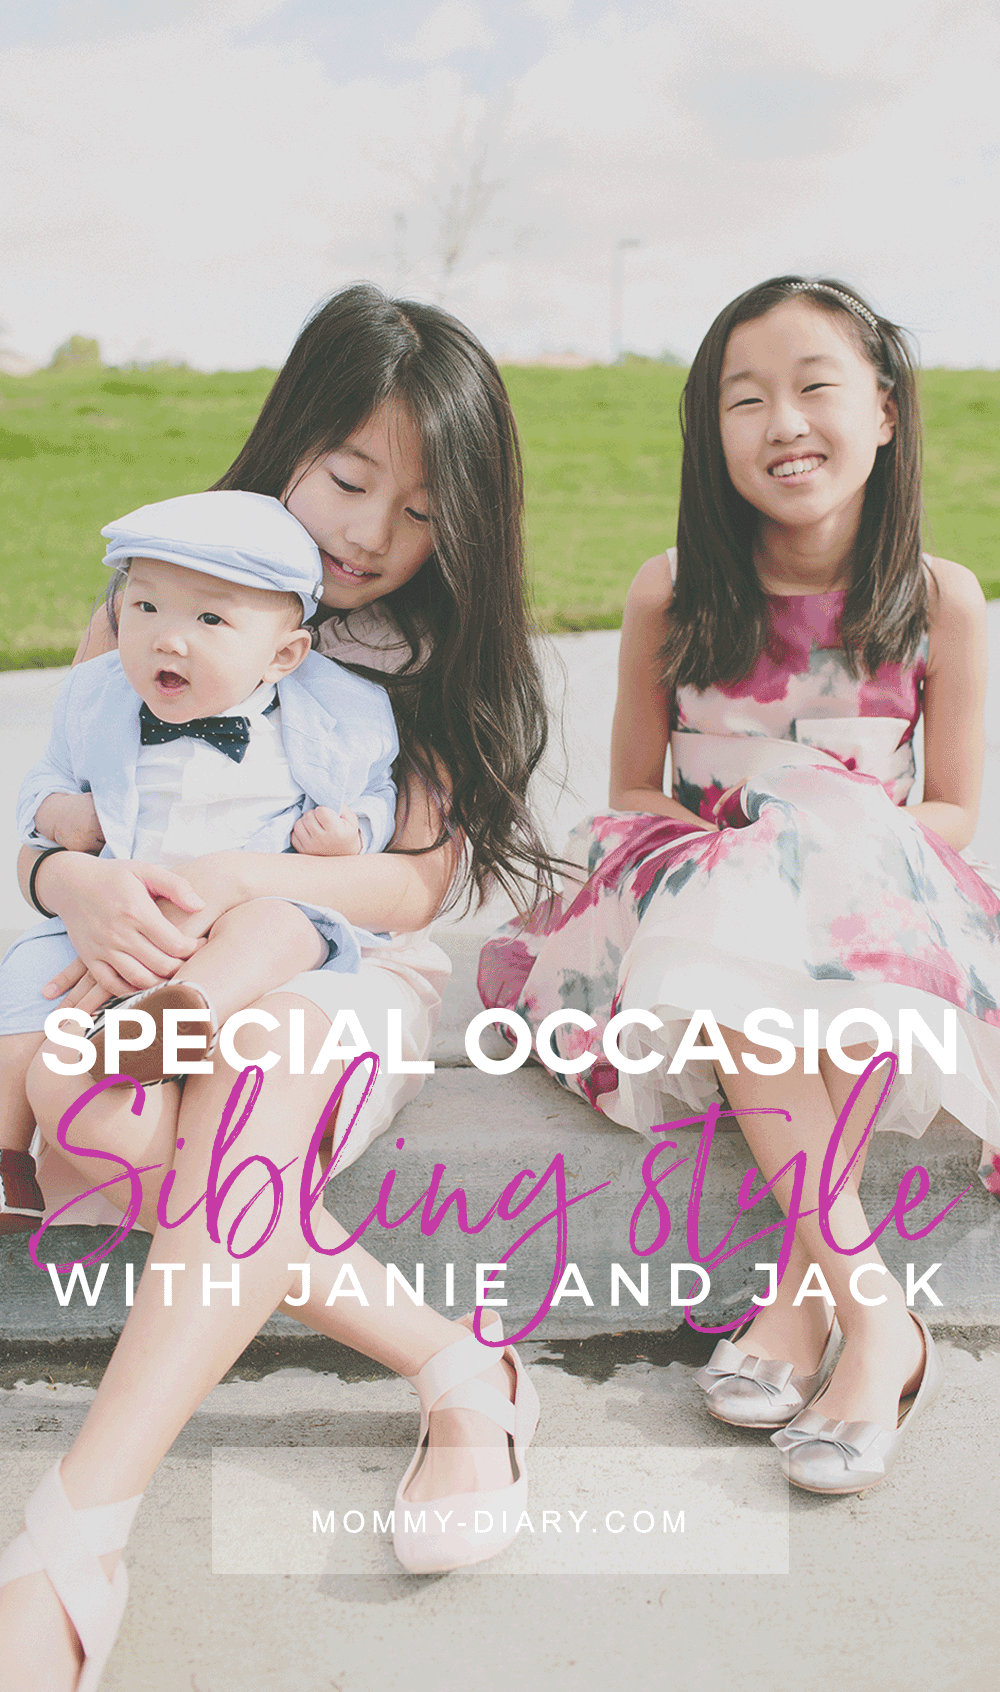 janie-and-jack-special-occasion-cover